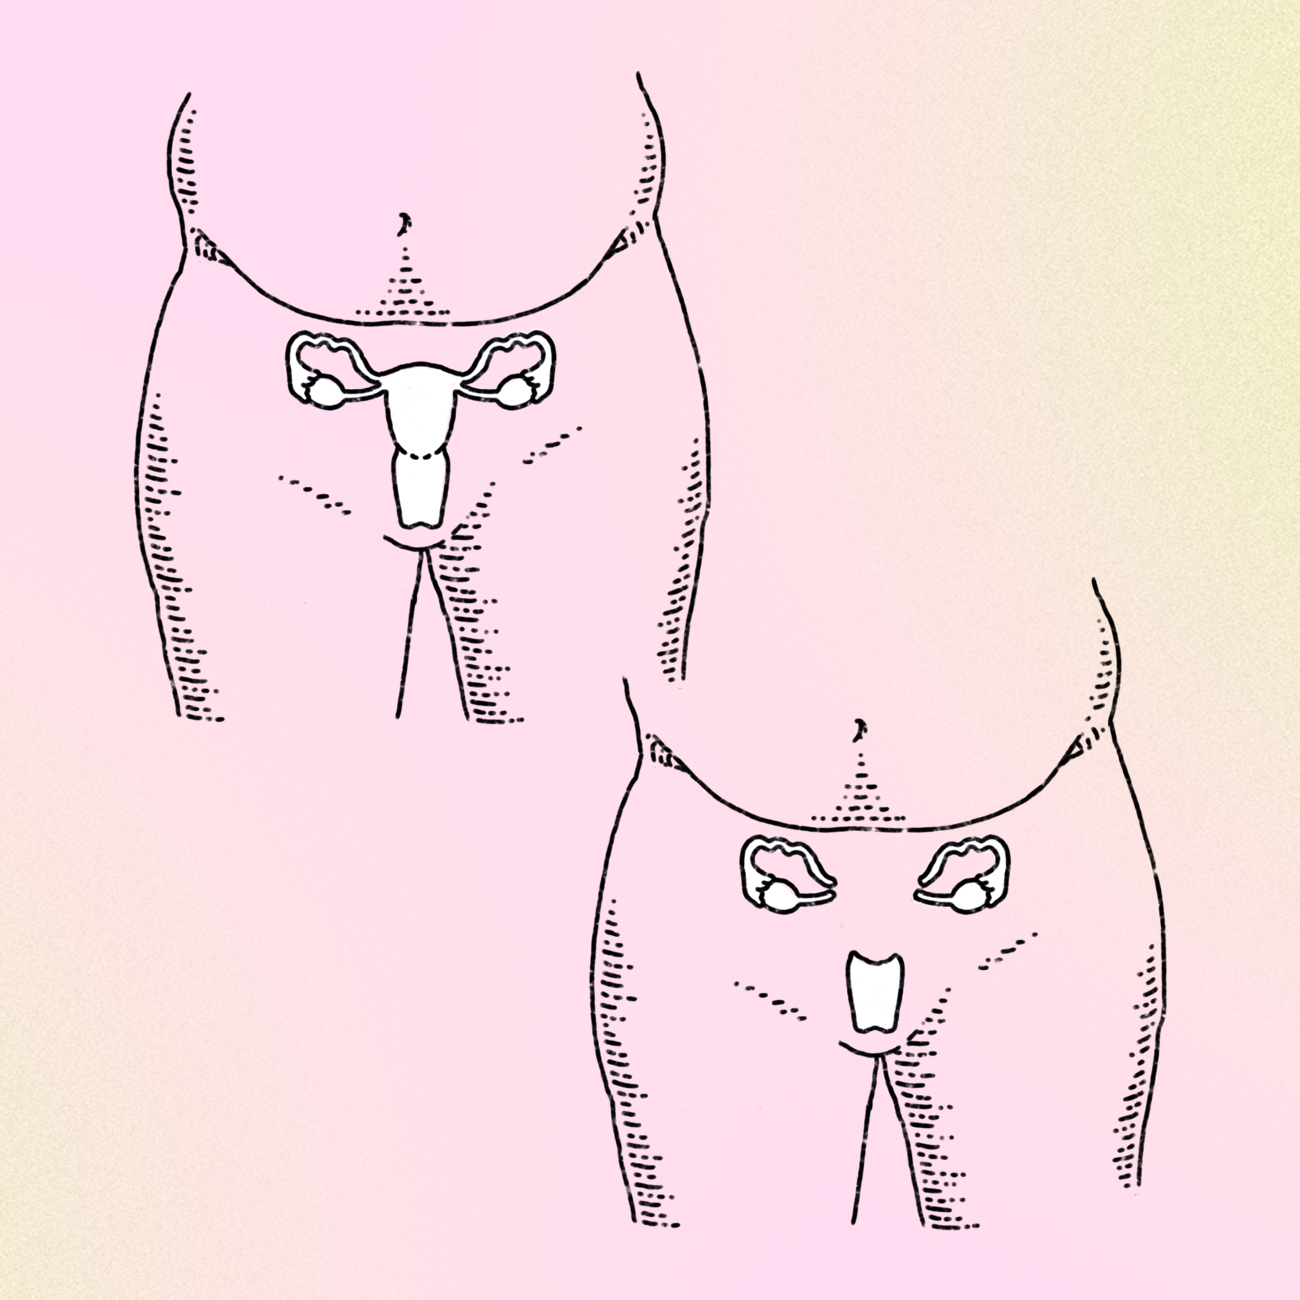 An example of a pelvis before and after a hysterectomy.